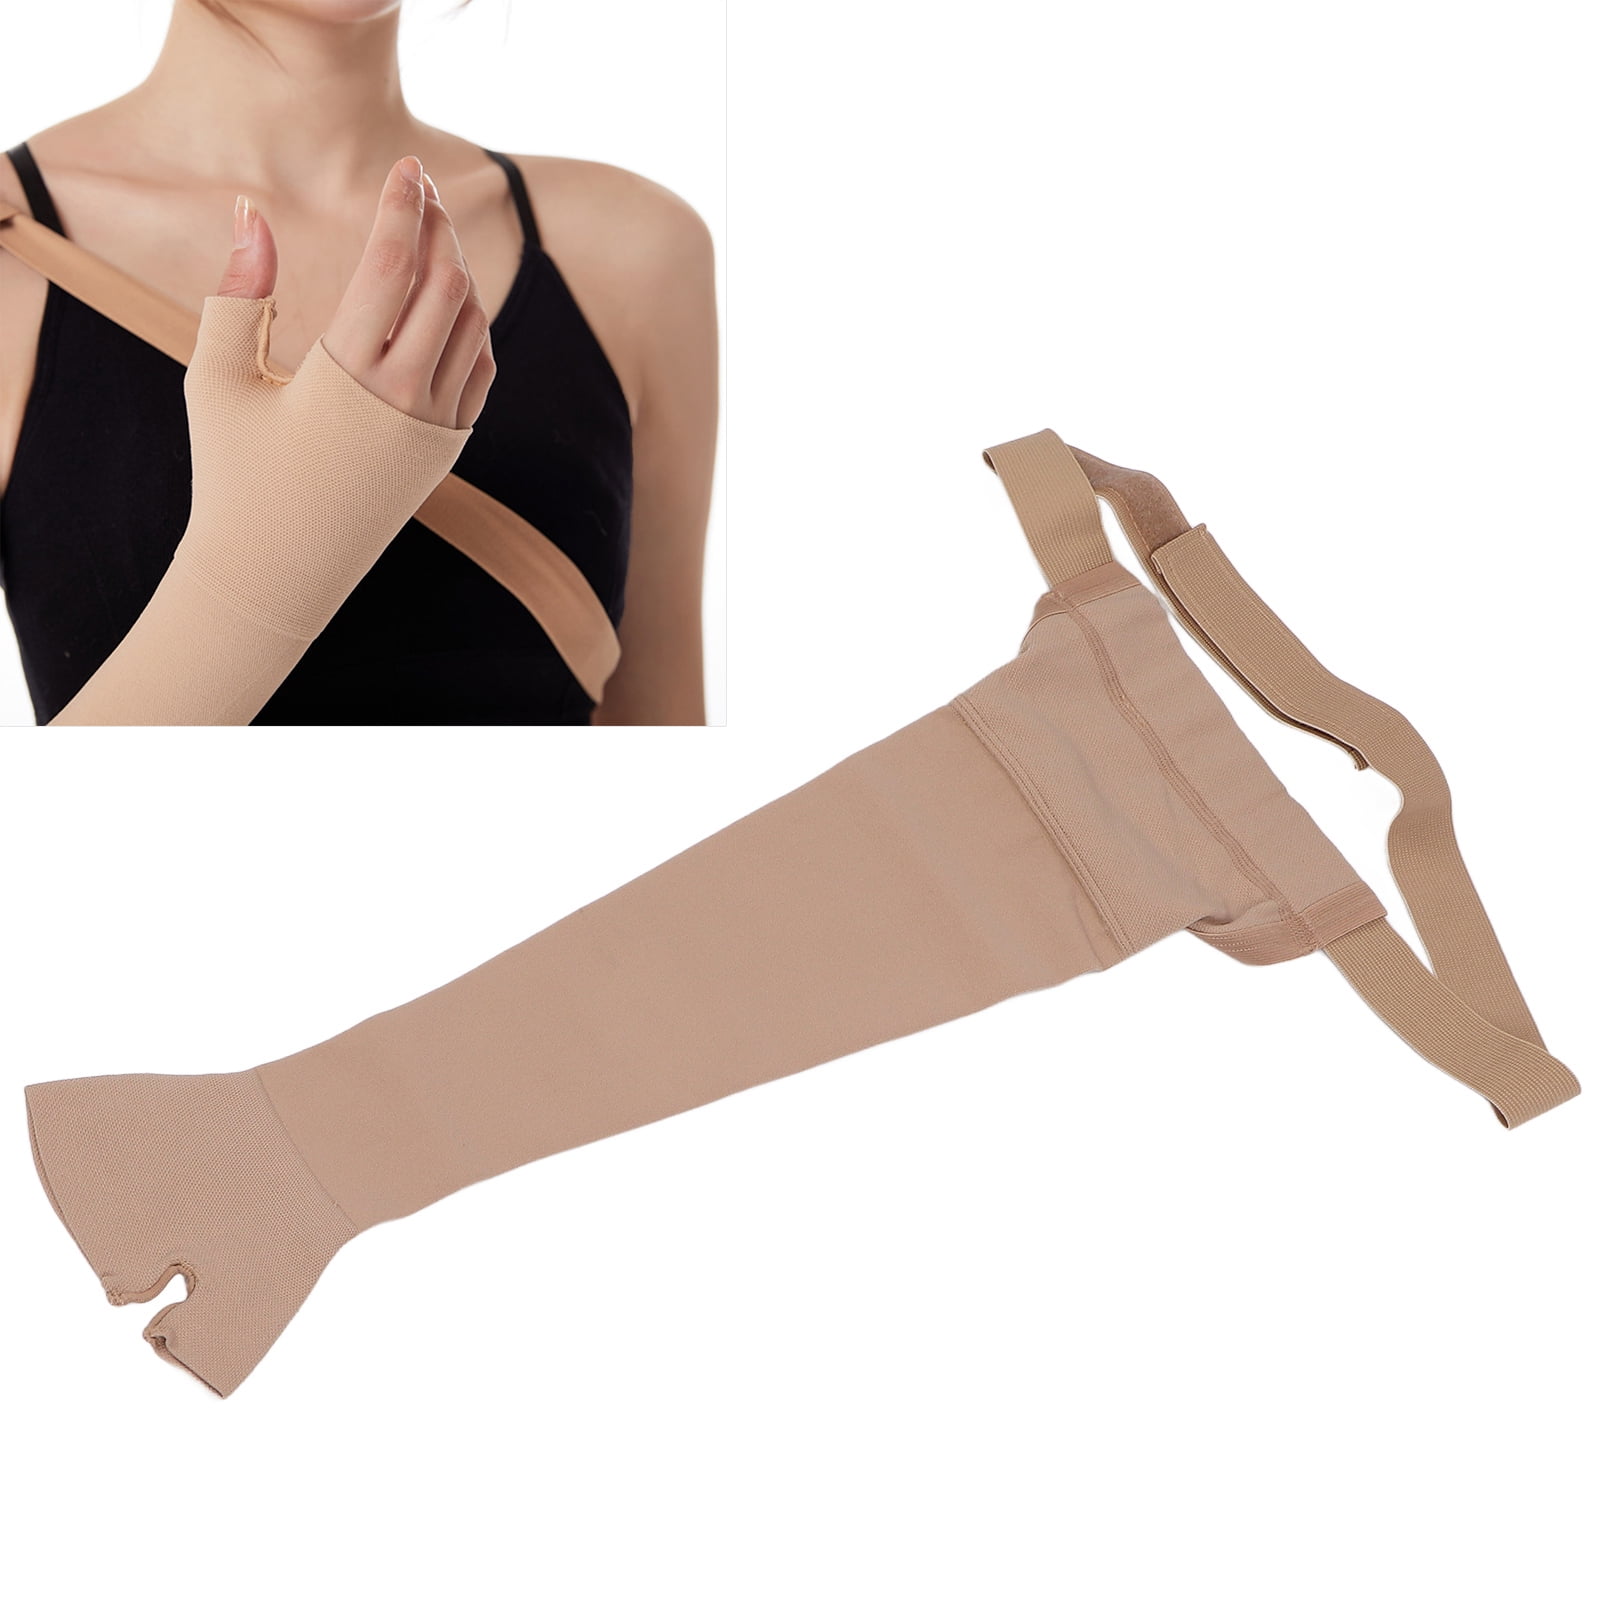 OTVIAP Lymphedema Compression Arm Sleeve, Post Mastectomy Support Arm  Sleeve for Swelling Support